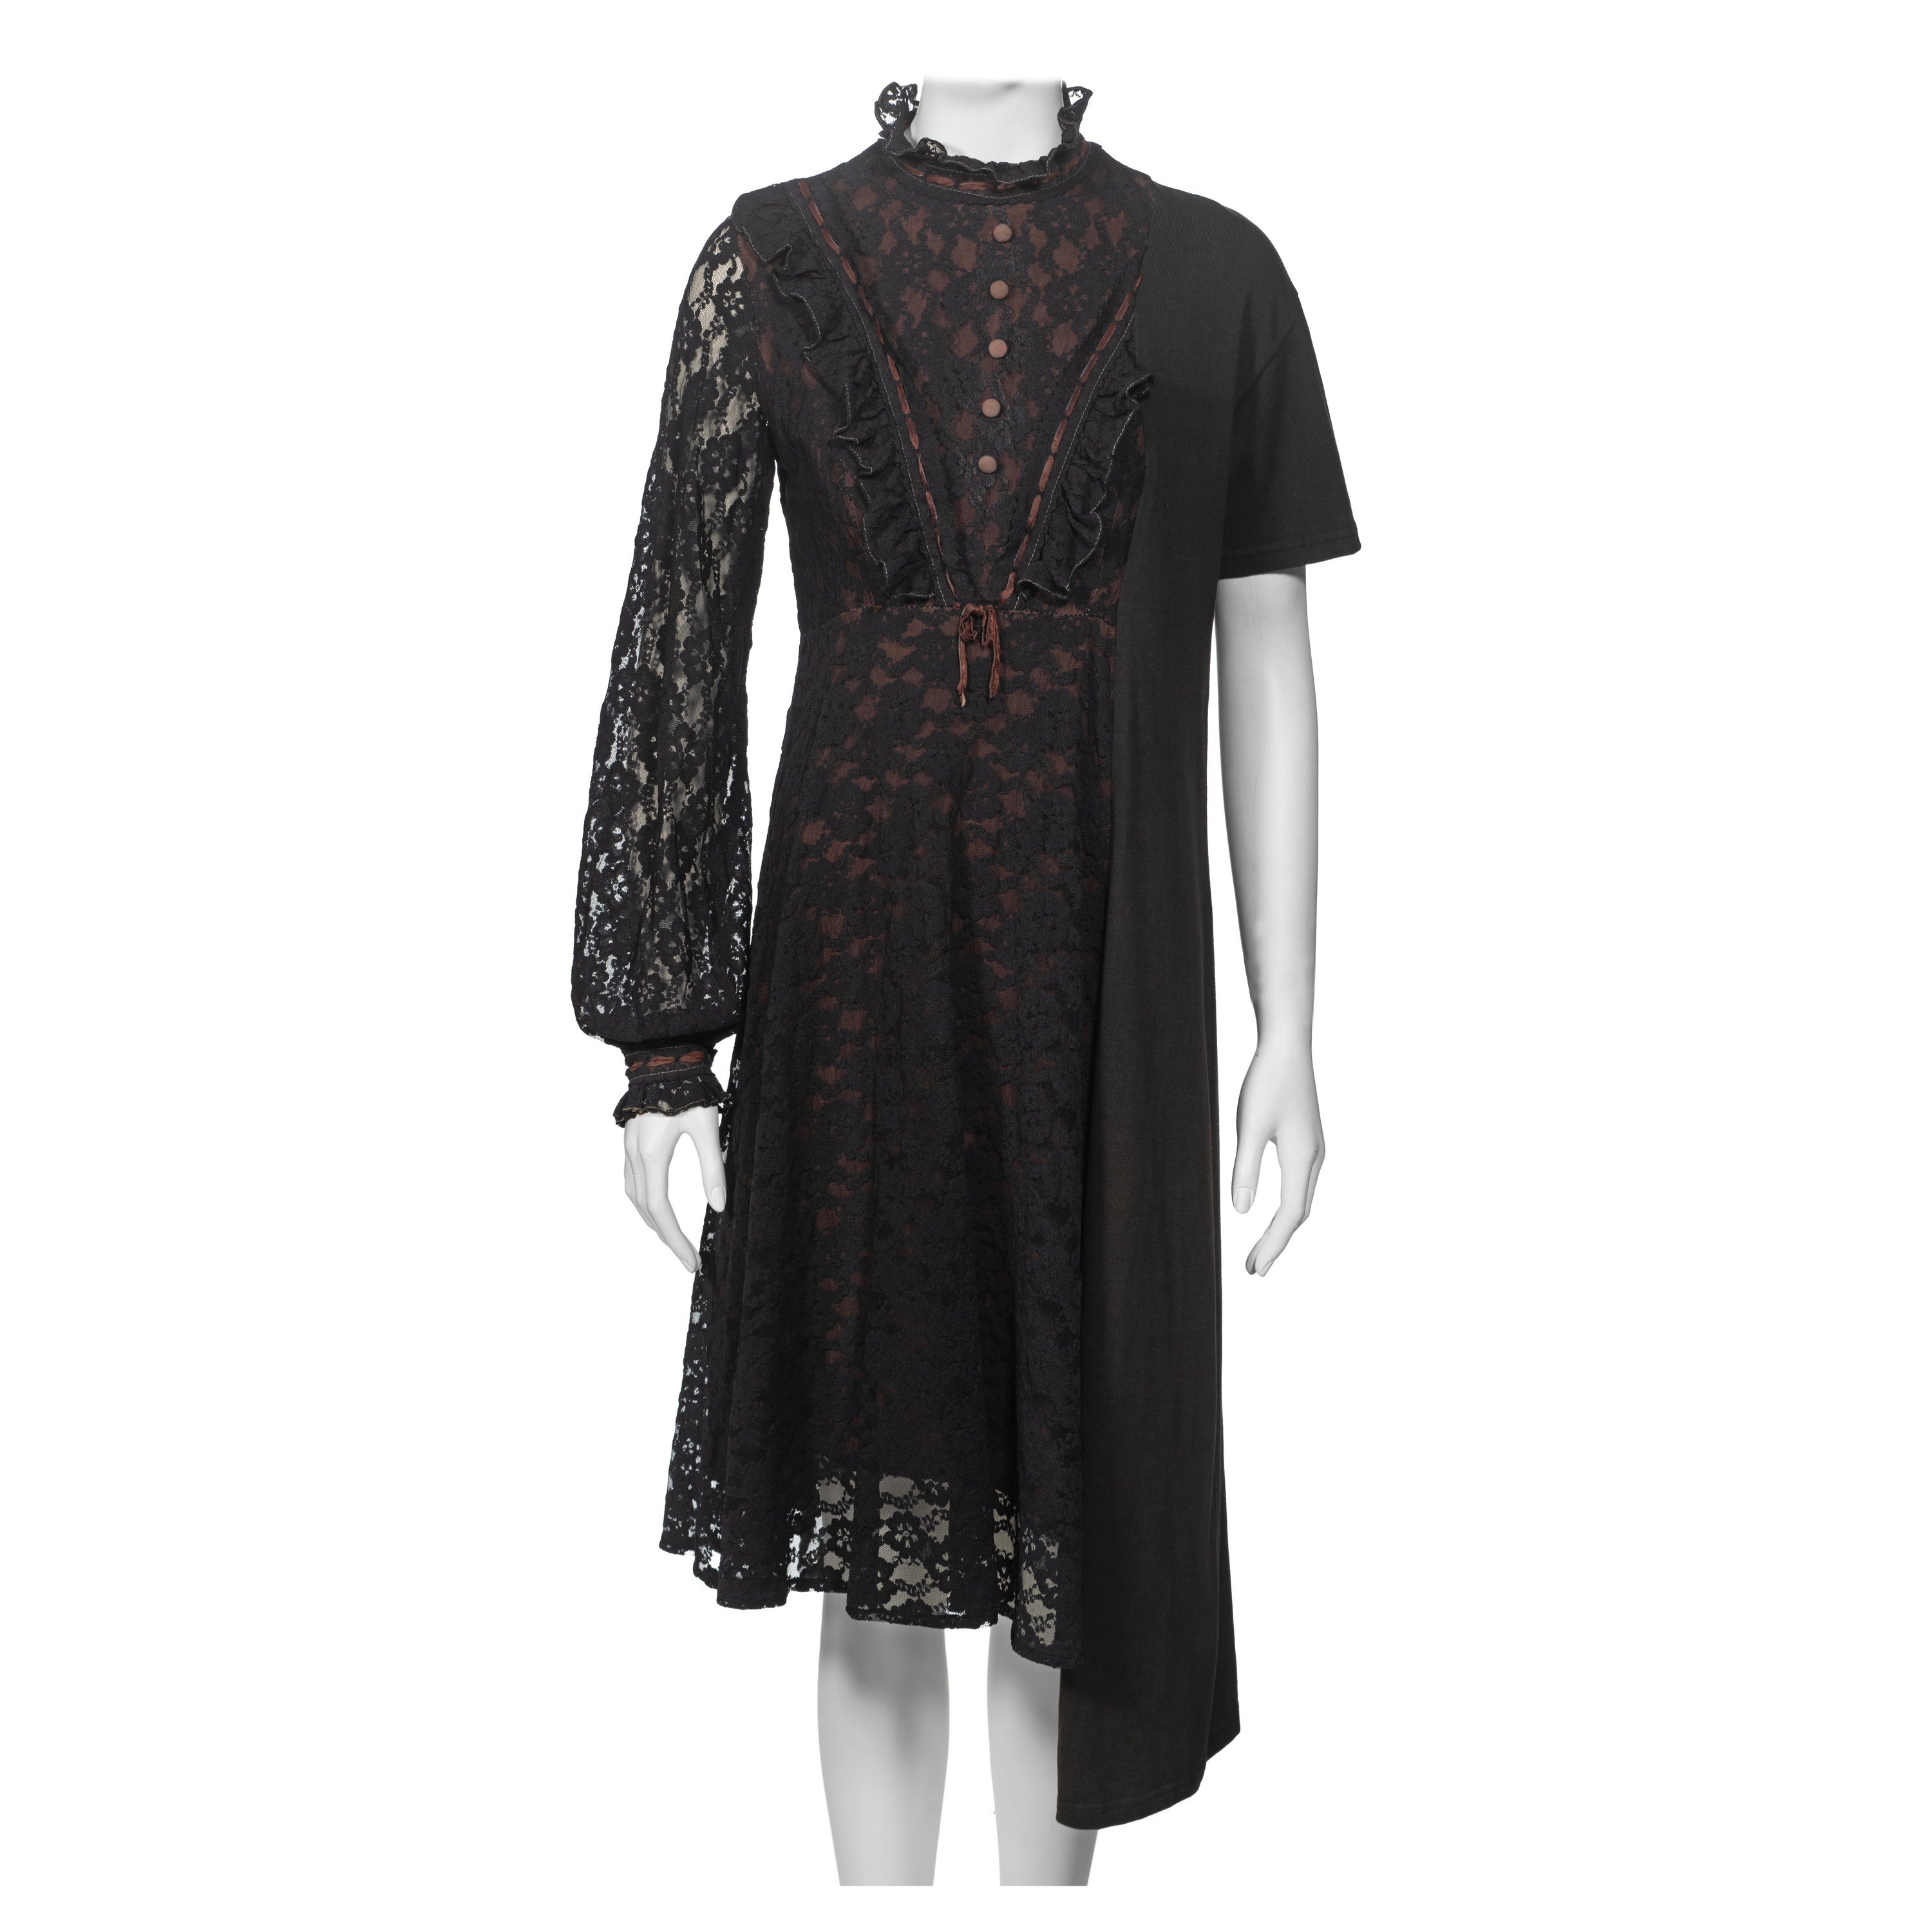 Martin Margiela Artisanal Dress Made From Two Vintage Dresses, fw 2003 For Sale